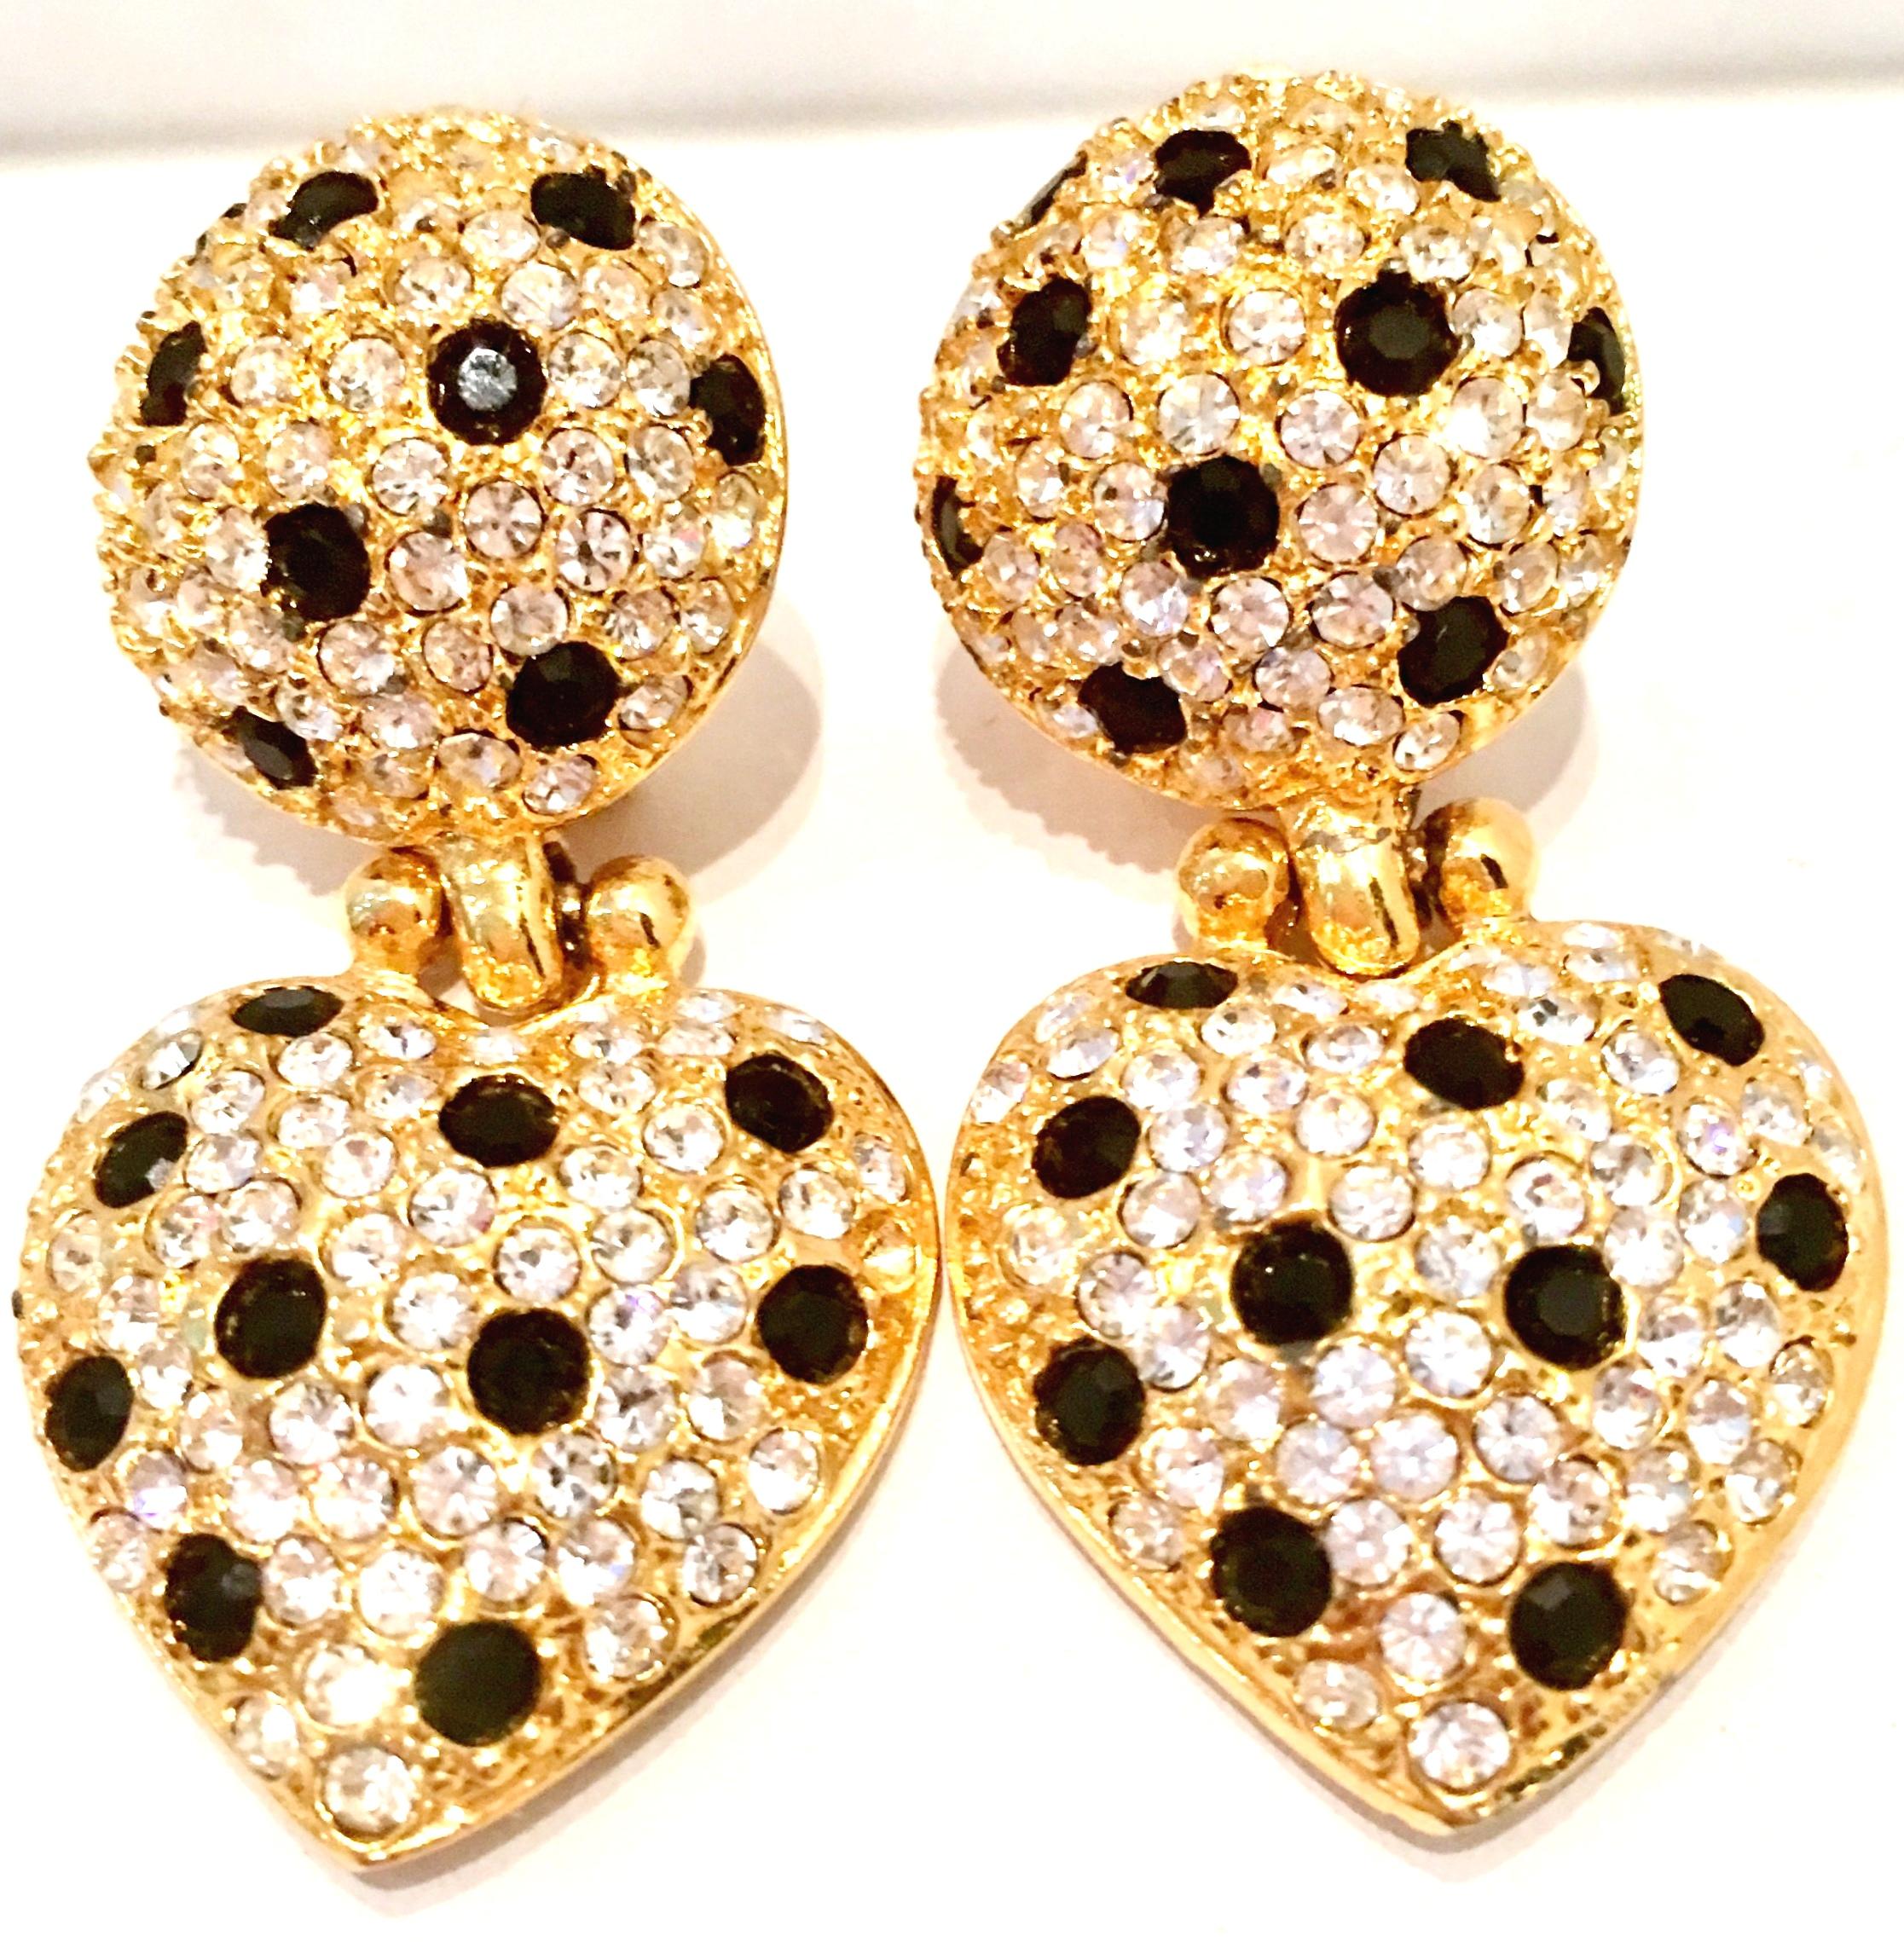 21st Century Gold Swarovski Crystal Heart Earrings By, Joan Rivers In Good Condition For Sale In West Palm Beach, FL